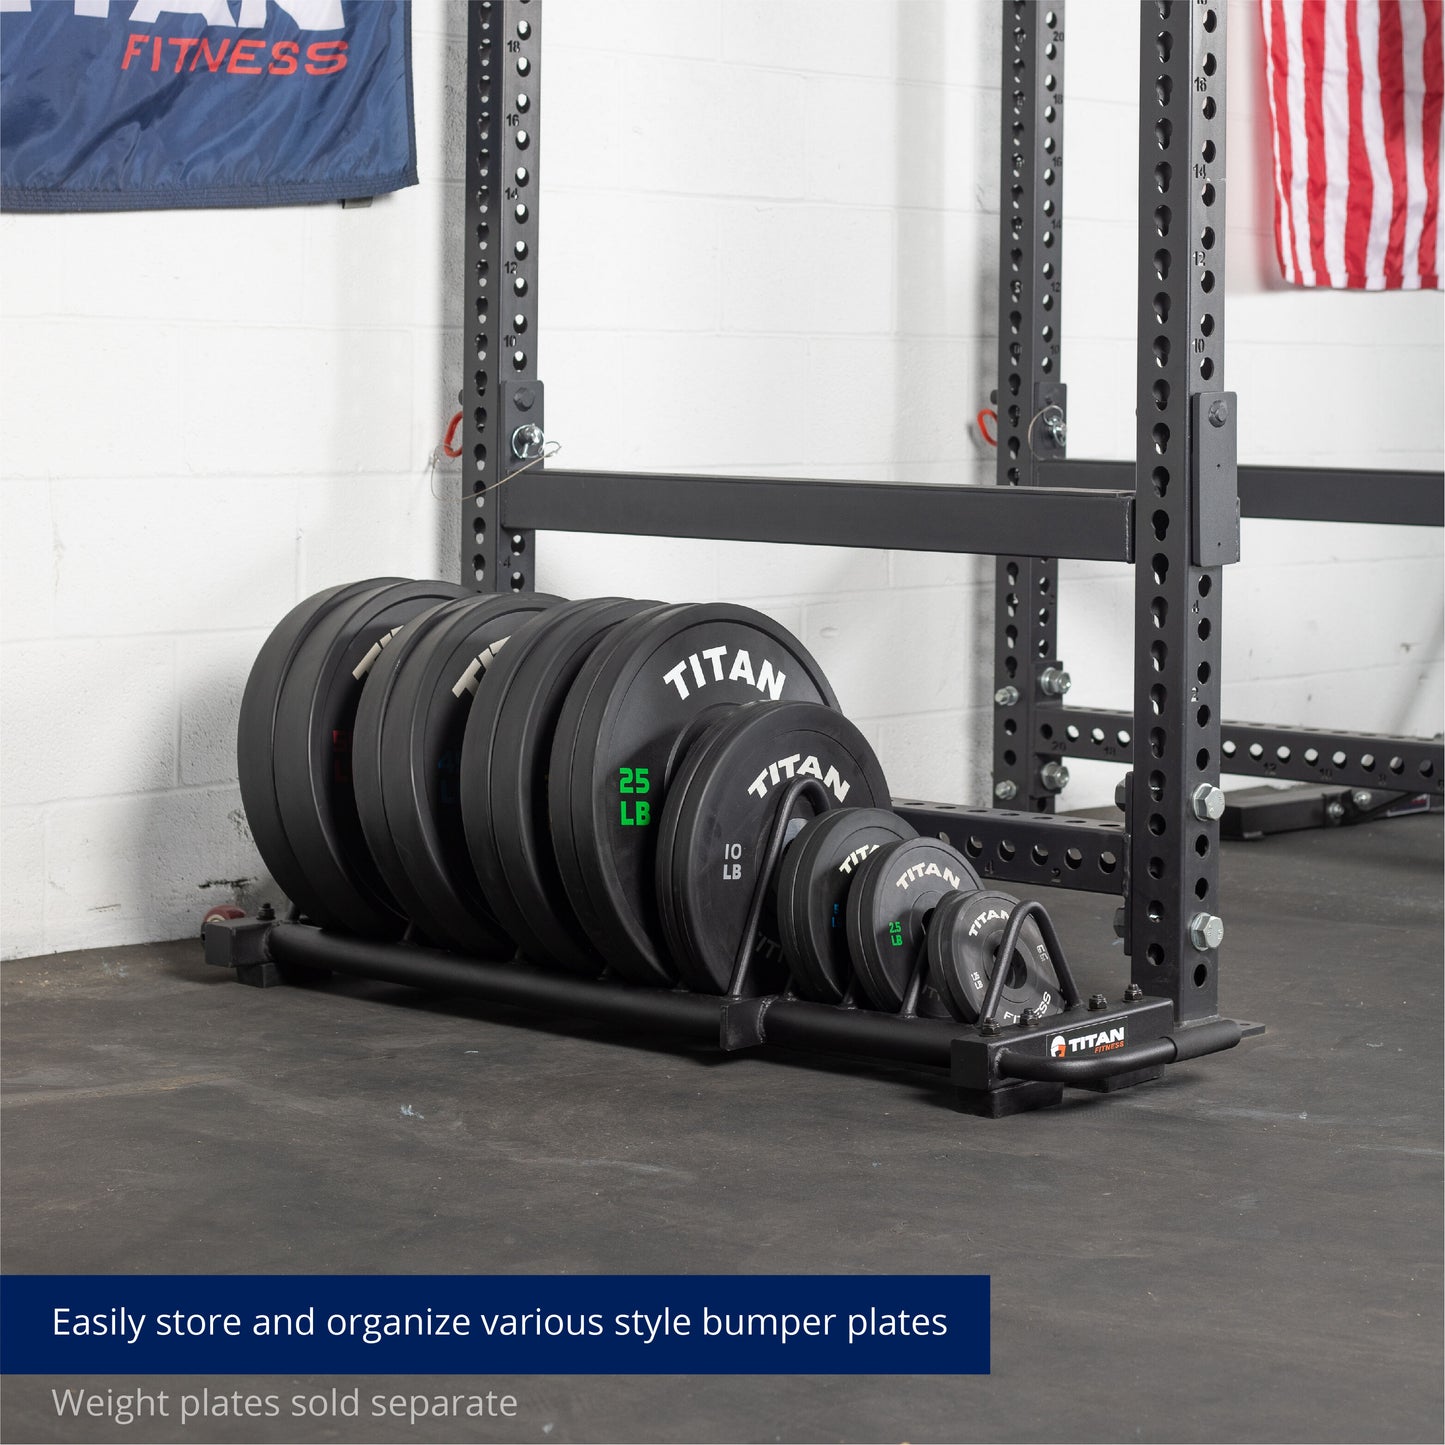 Horizontal Weight Plate Storage With Wheels - view 3